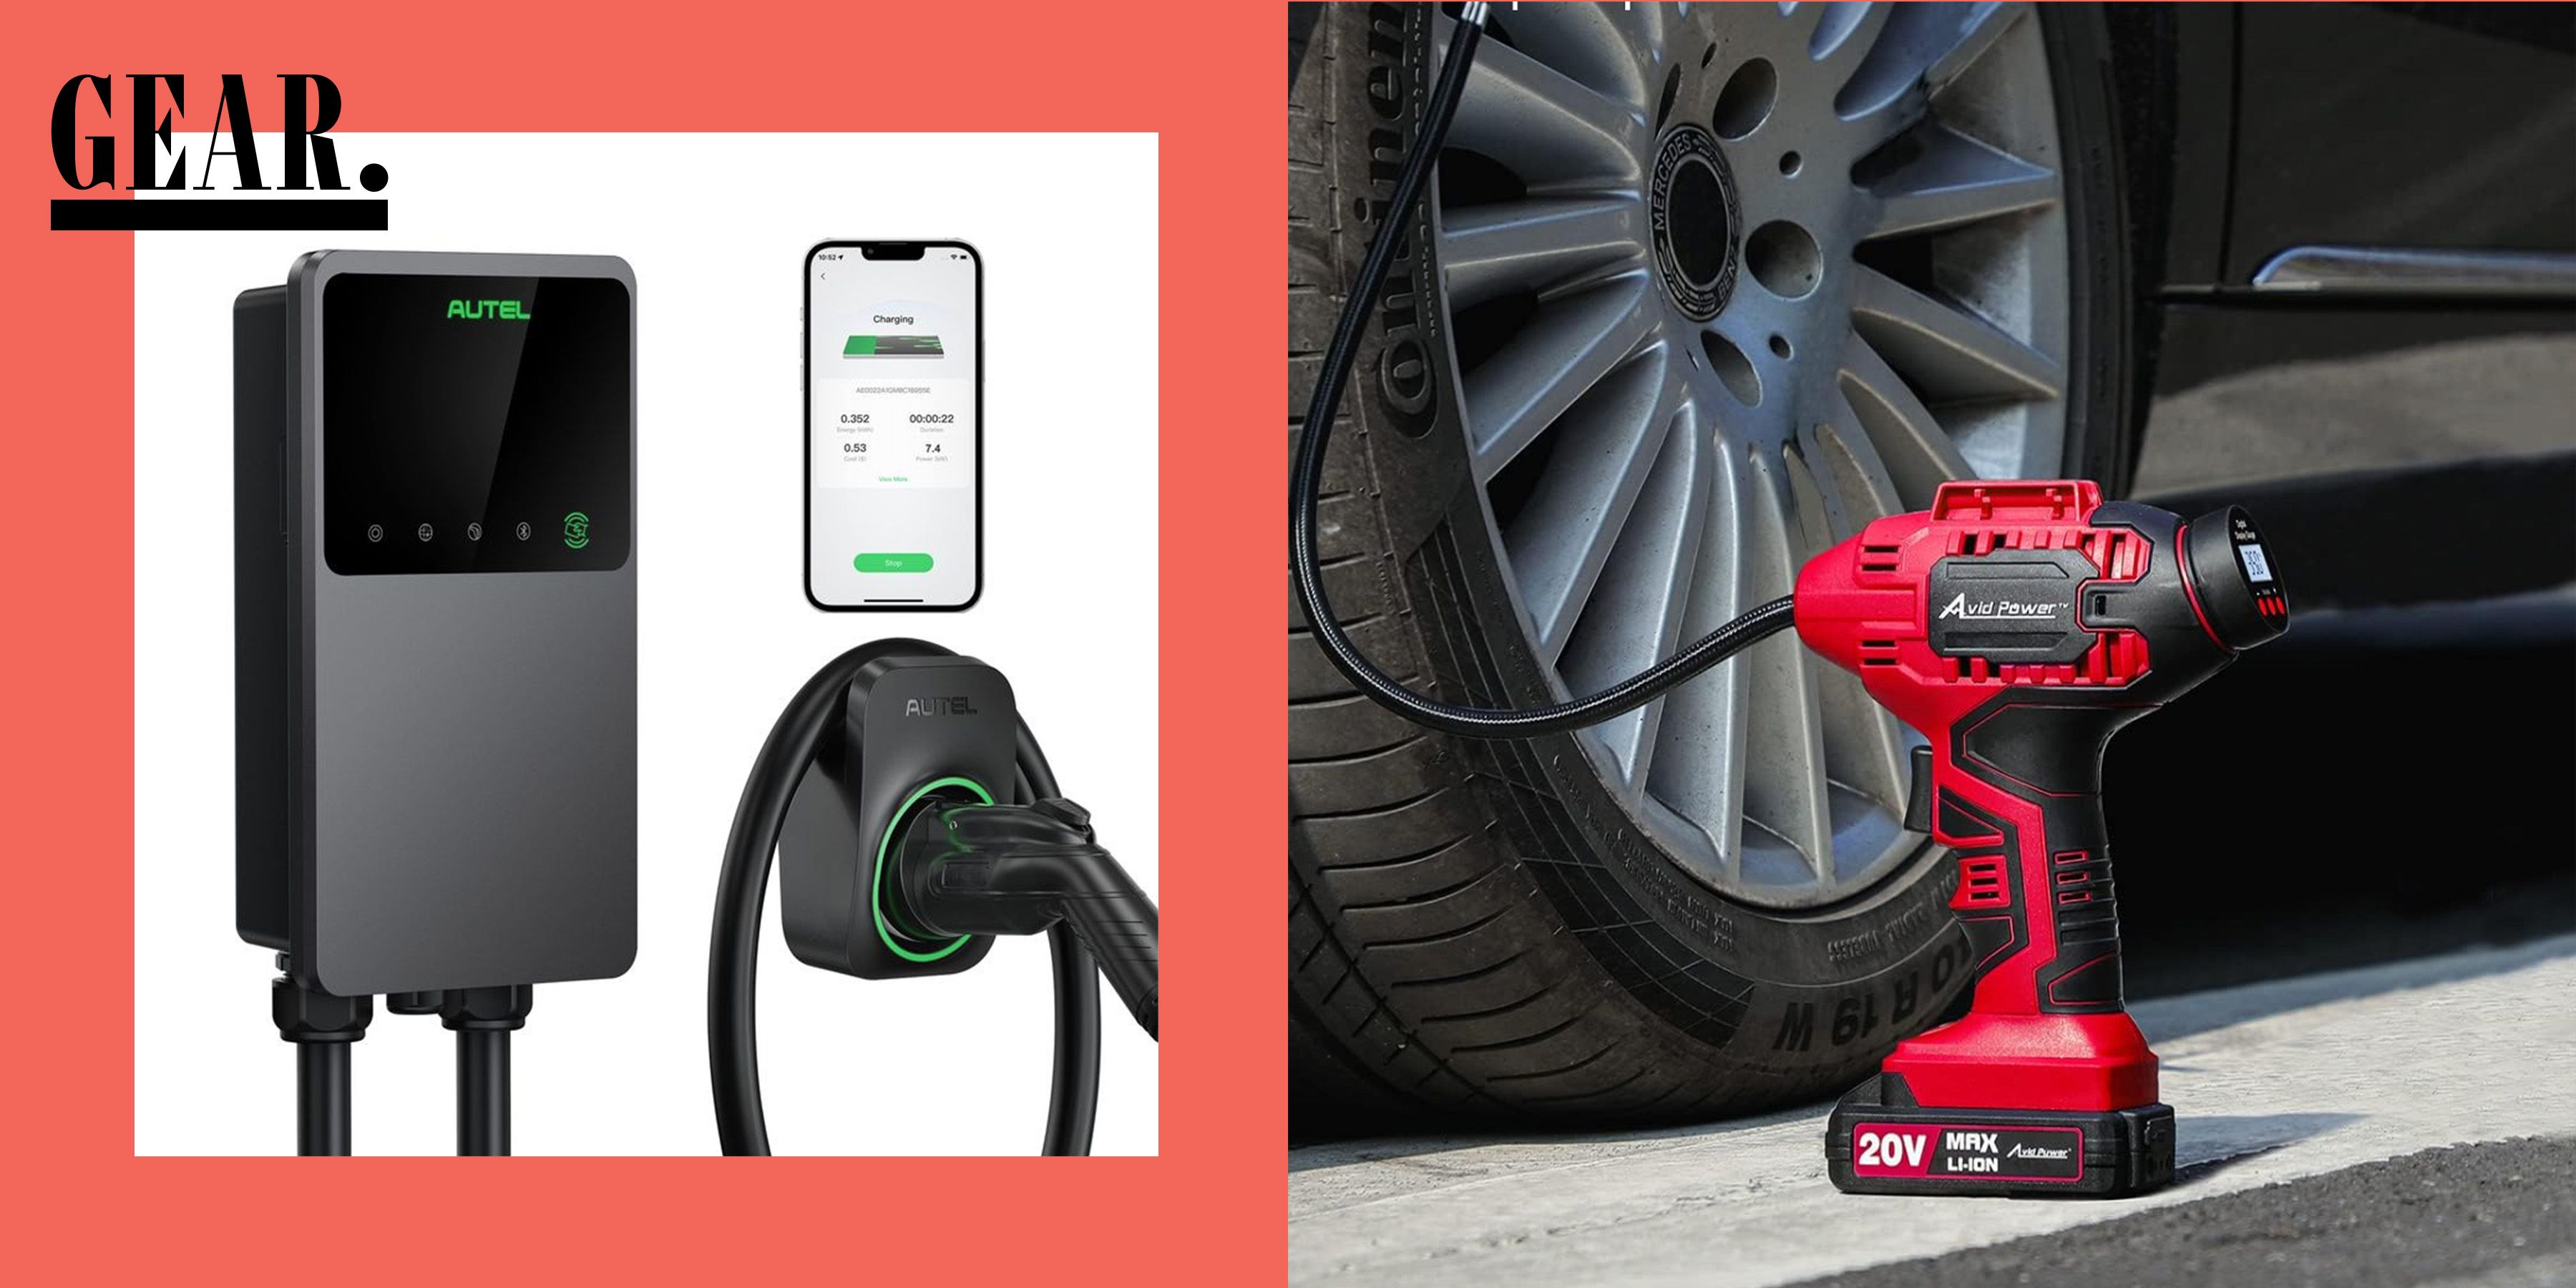 Prime Day Is Here! Find Great Deals on Car Gear, Tools, Tires, Parts, and More